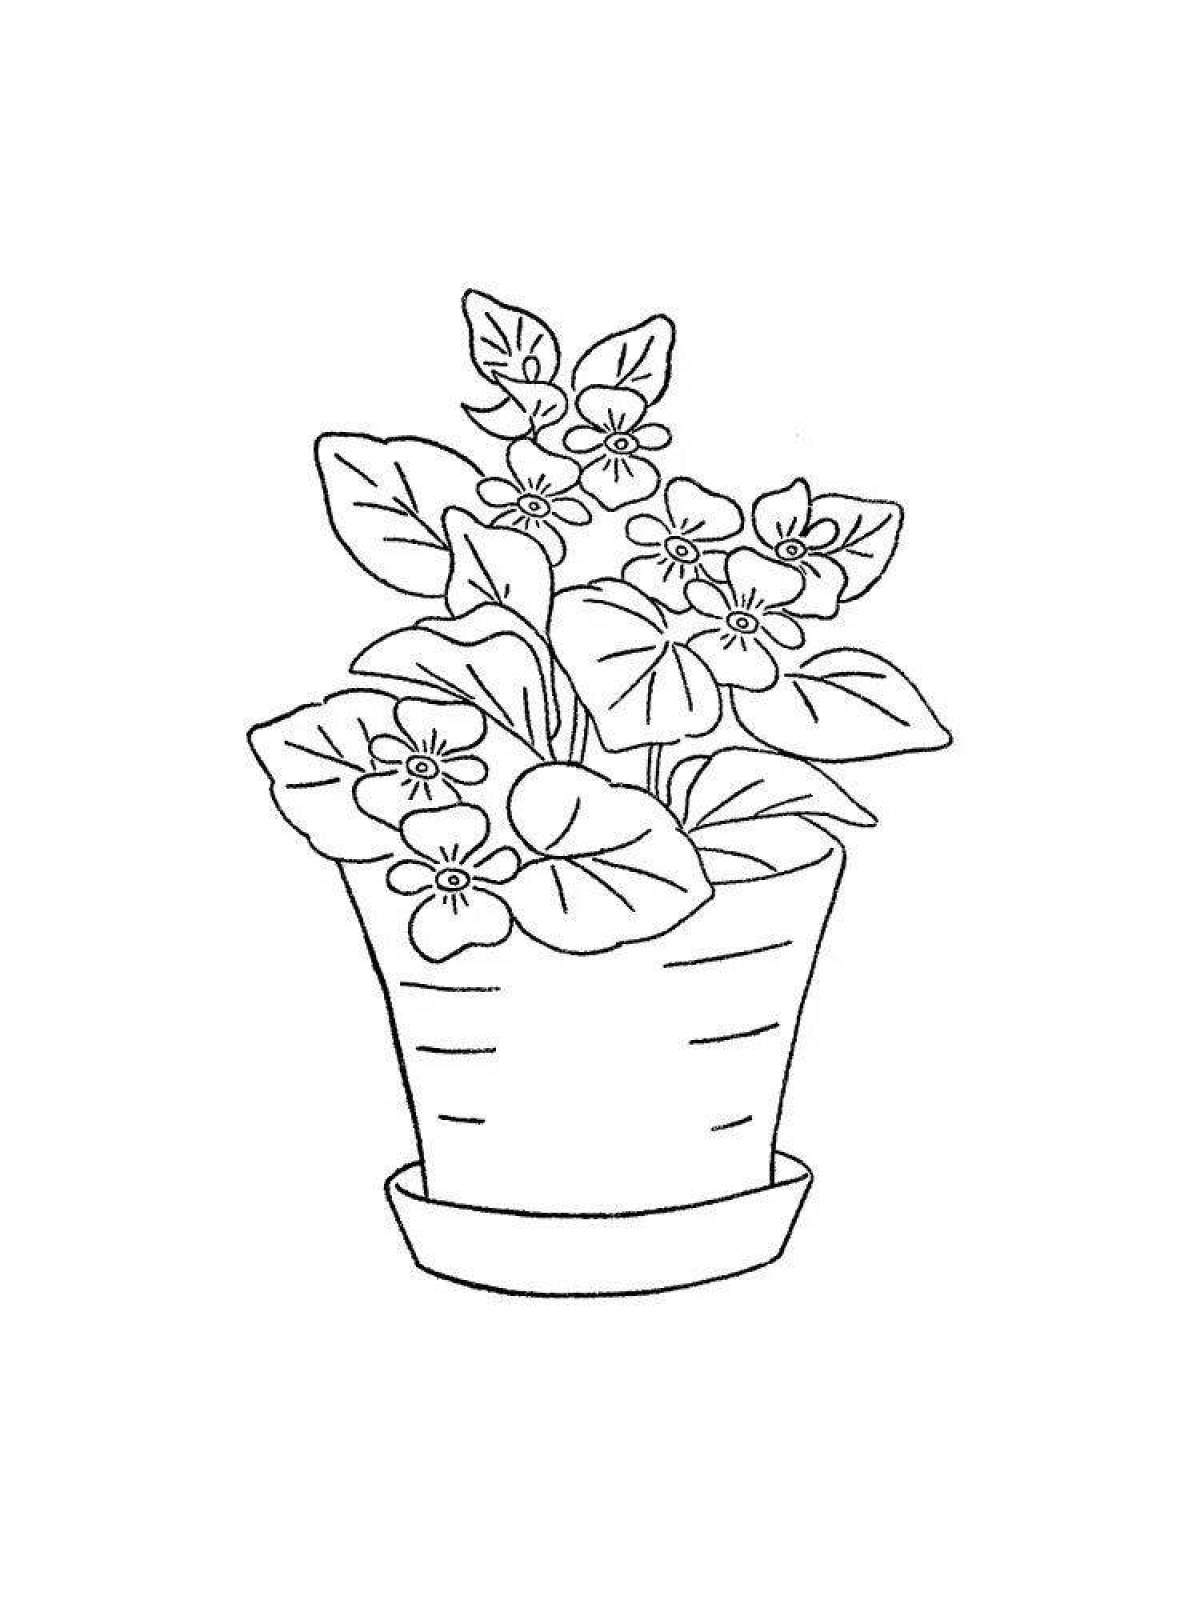 Coloring book for cute houseplants for 4-5 year olds